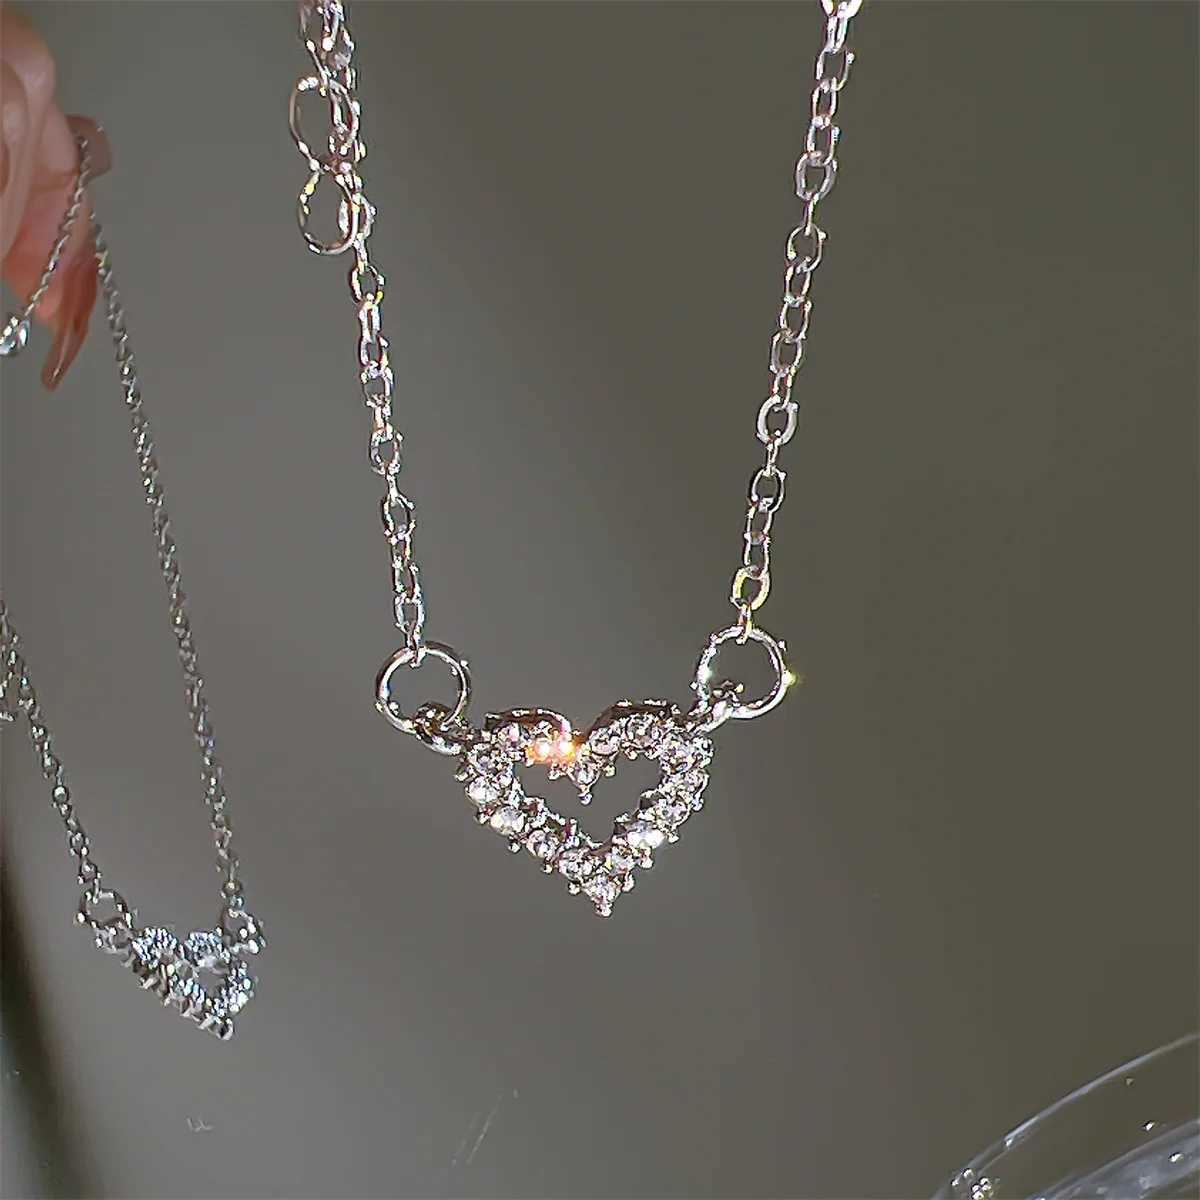 Pendant Necklaces 17KM Fashion Butterfly Heart Zircon Necklace for Women Girls Silver Color Shiny Love Clavicle Chain Necklaces New Trend Jewelry YQ240124